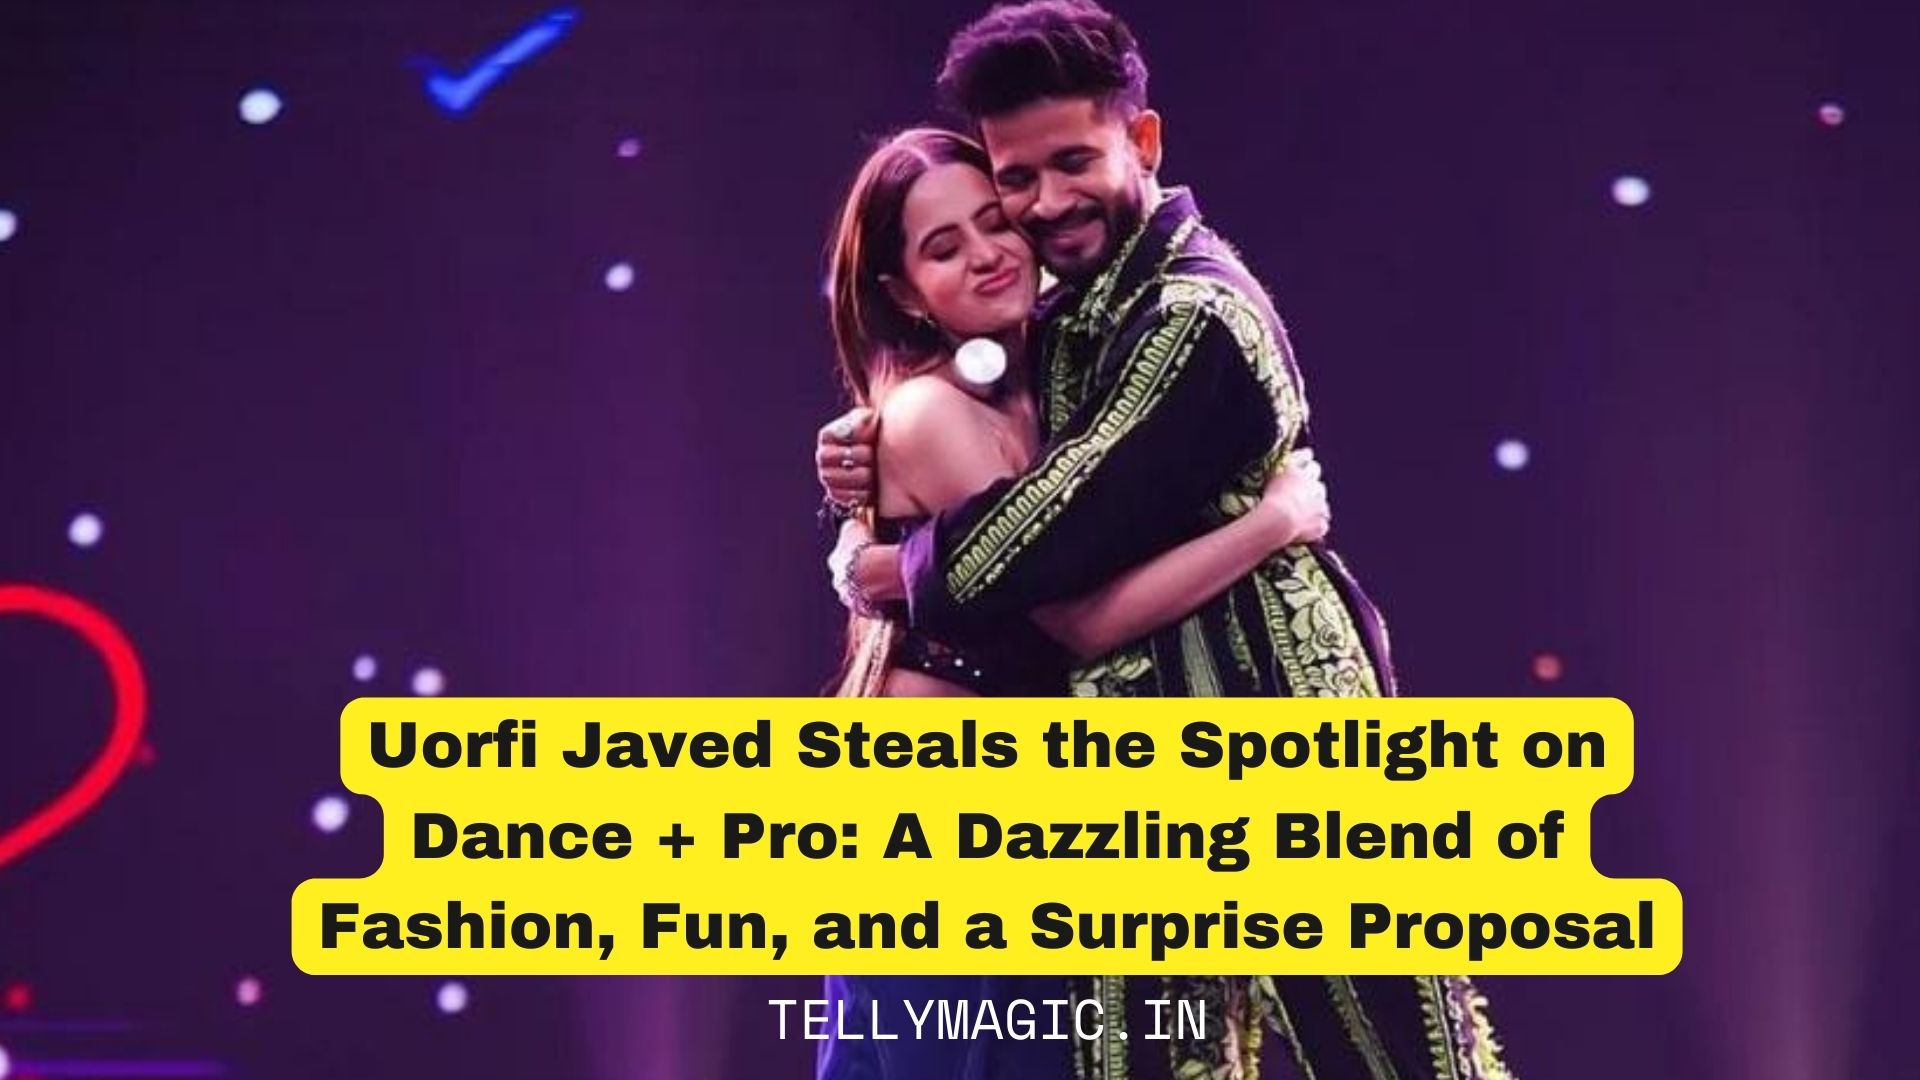 Uorfi Javed Steals the Spotlight on Dance + Pro: A Dazzling Blend of Fashion, Fun, and a Surprise Proposal